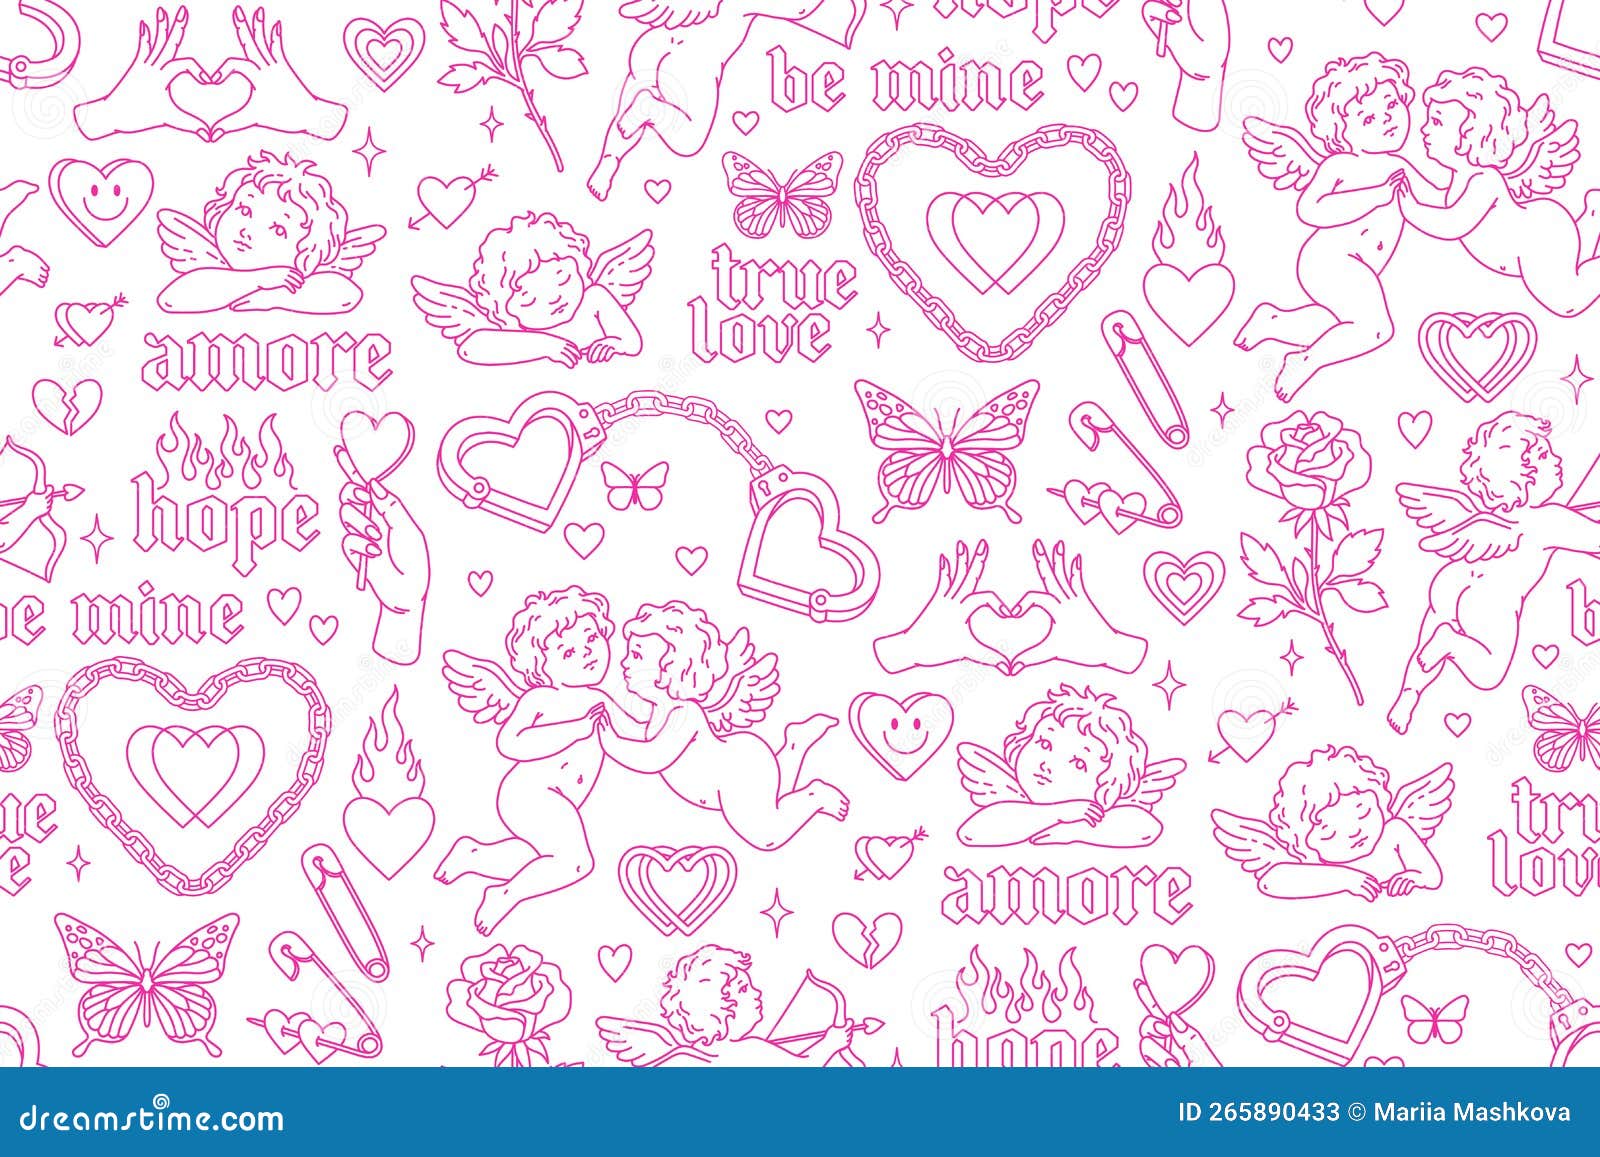 angel and heart tattoo art 1990s-2000s seamless pattern. love concept. happy valentines day.